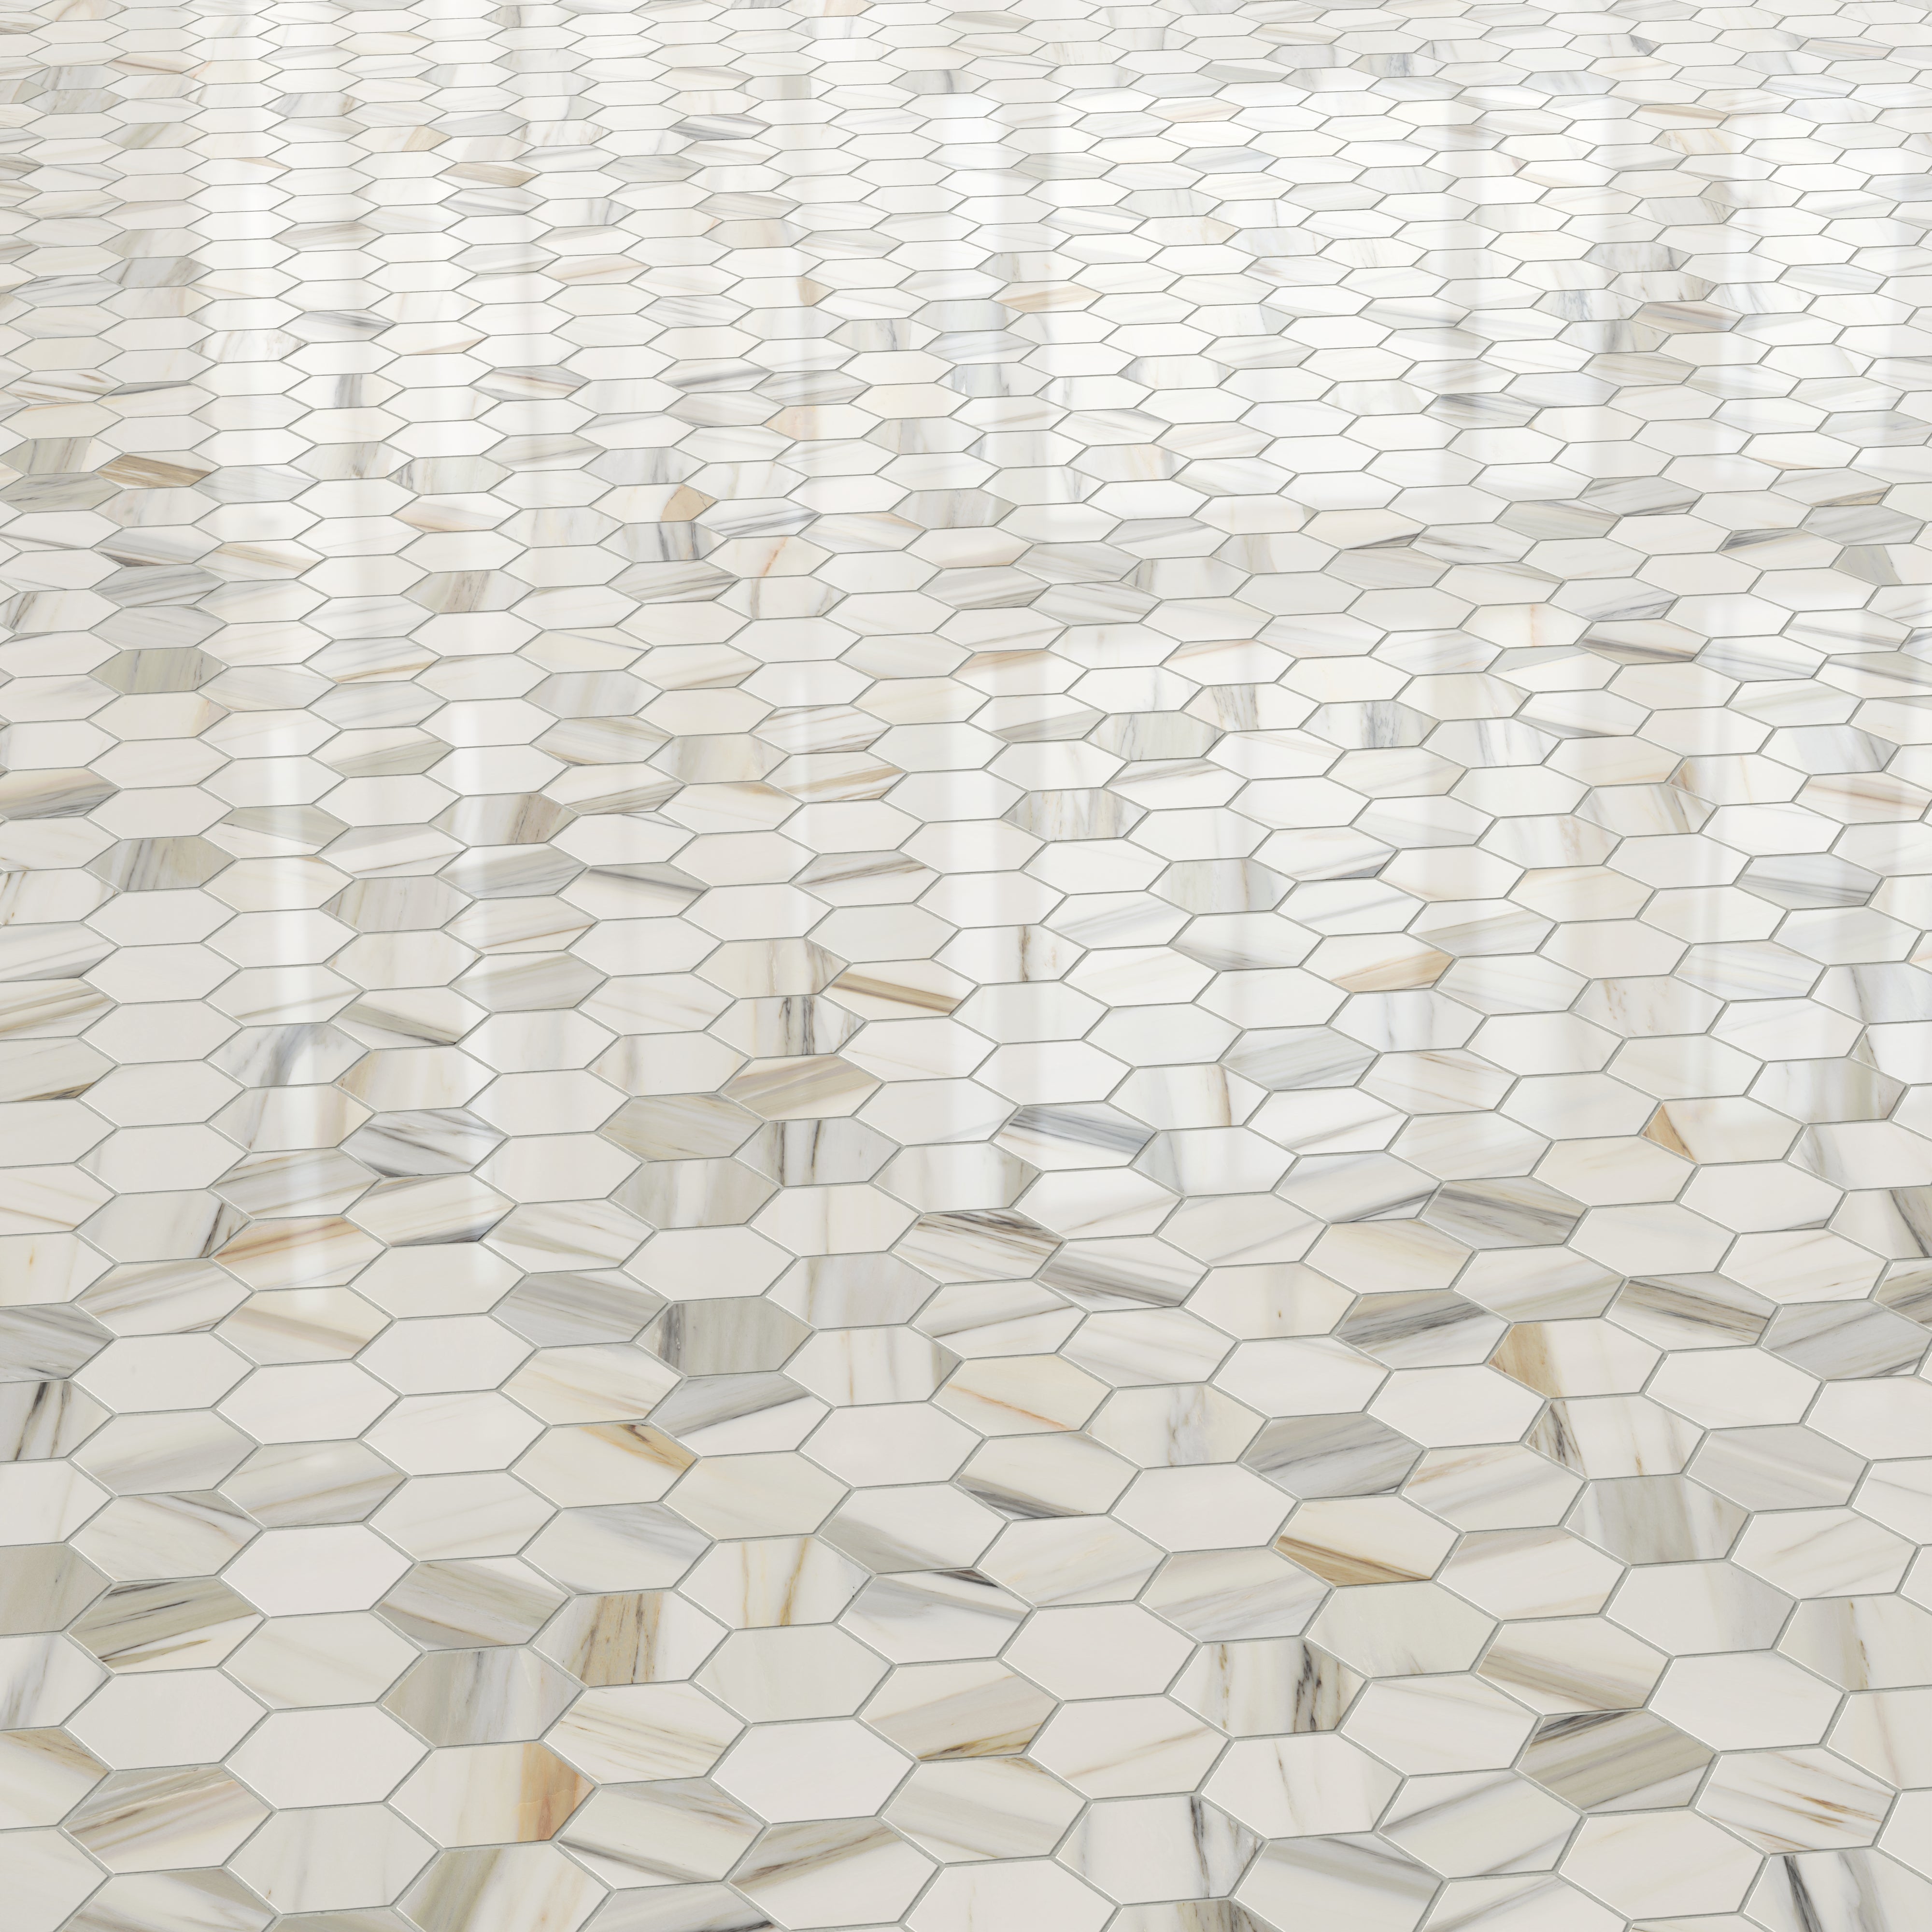 Aniston 2x2 Polished Porcelain Hexagon Mosaic Tile in Calacatta Cremo